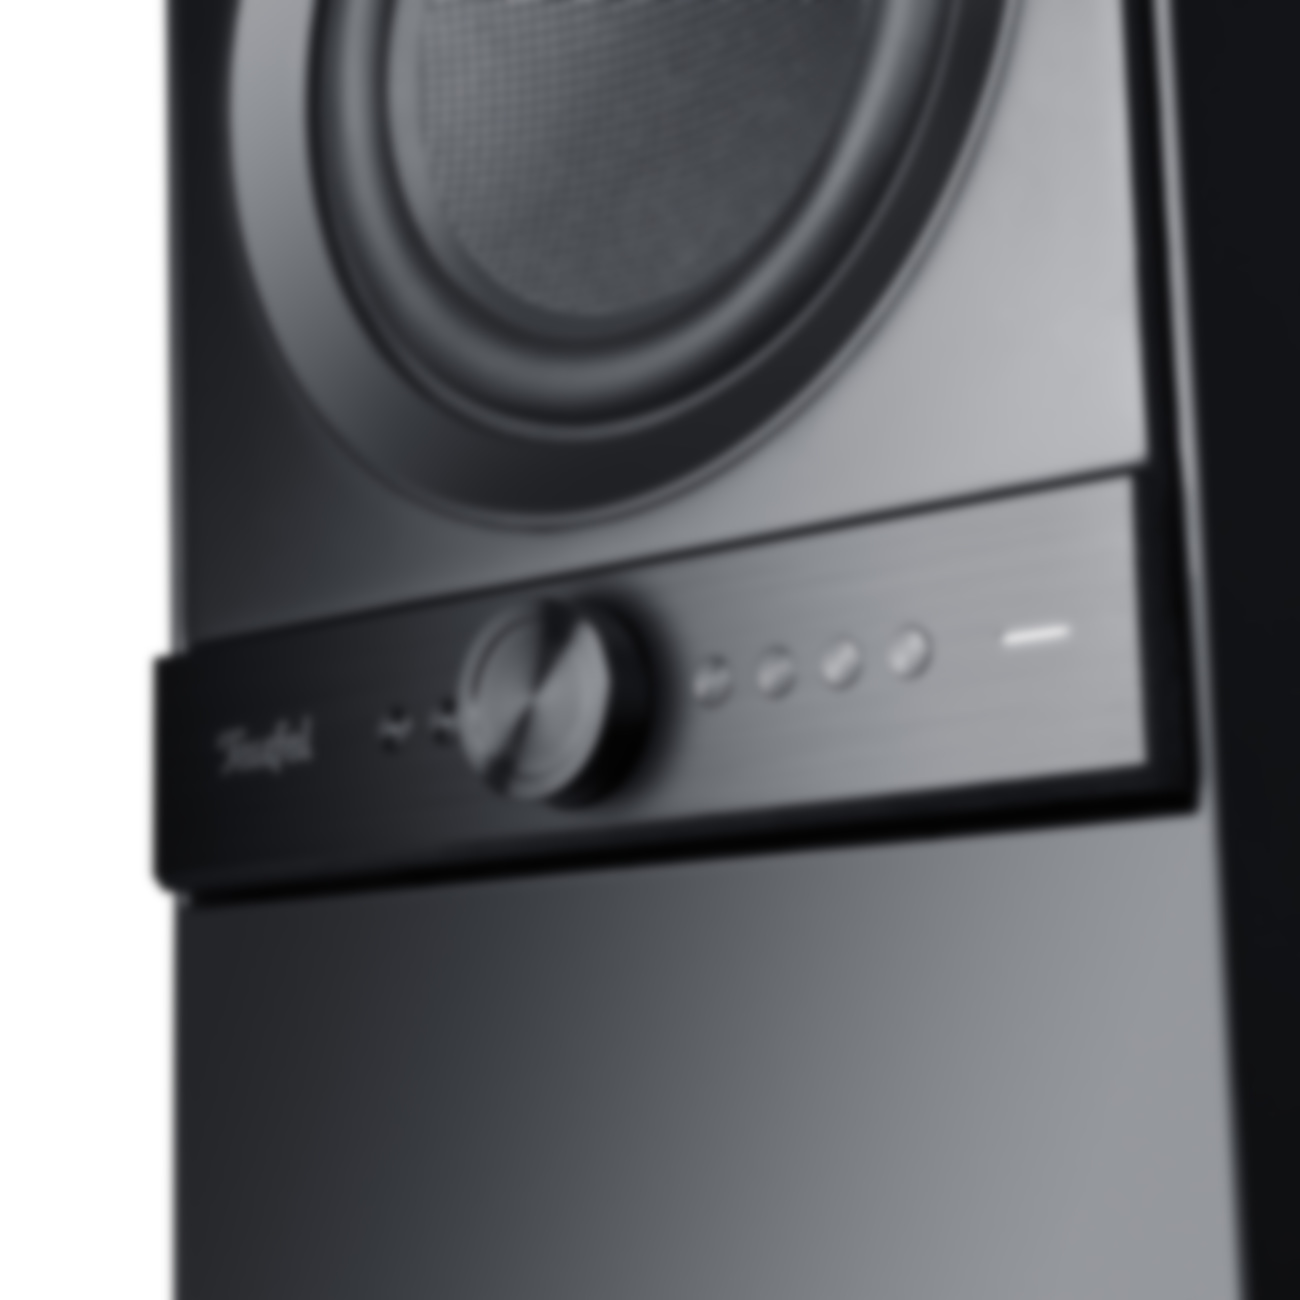 Teufel Stereo L - black - detail - touch panel